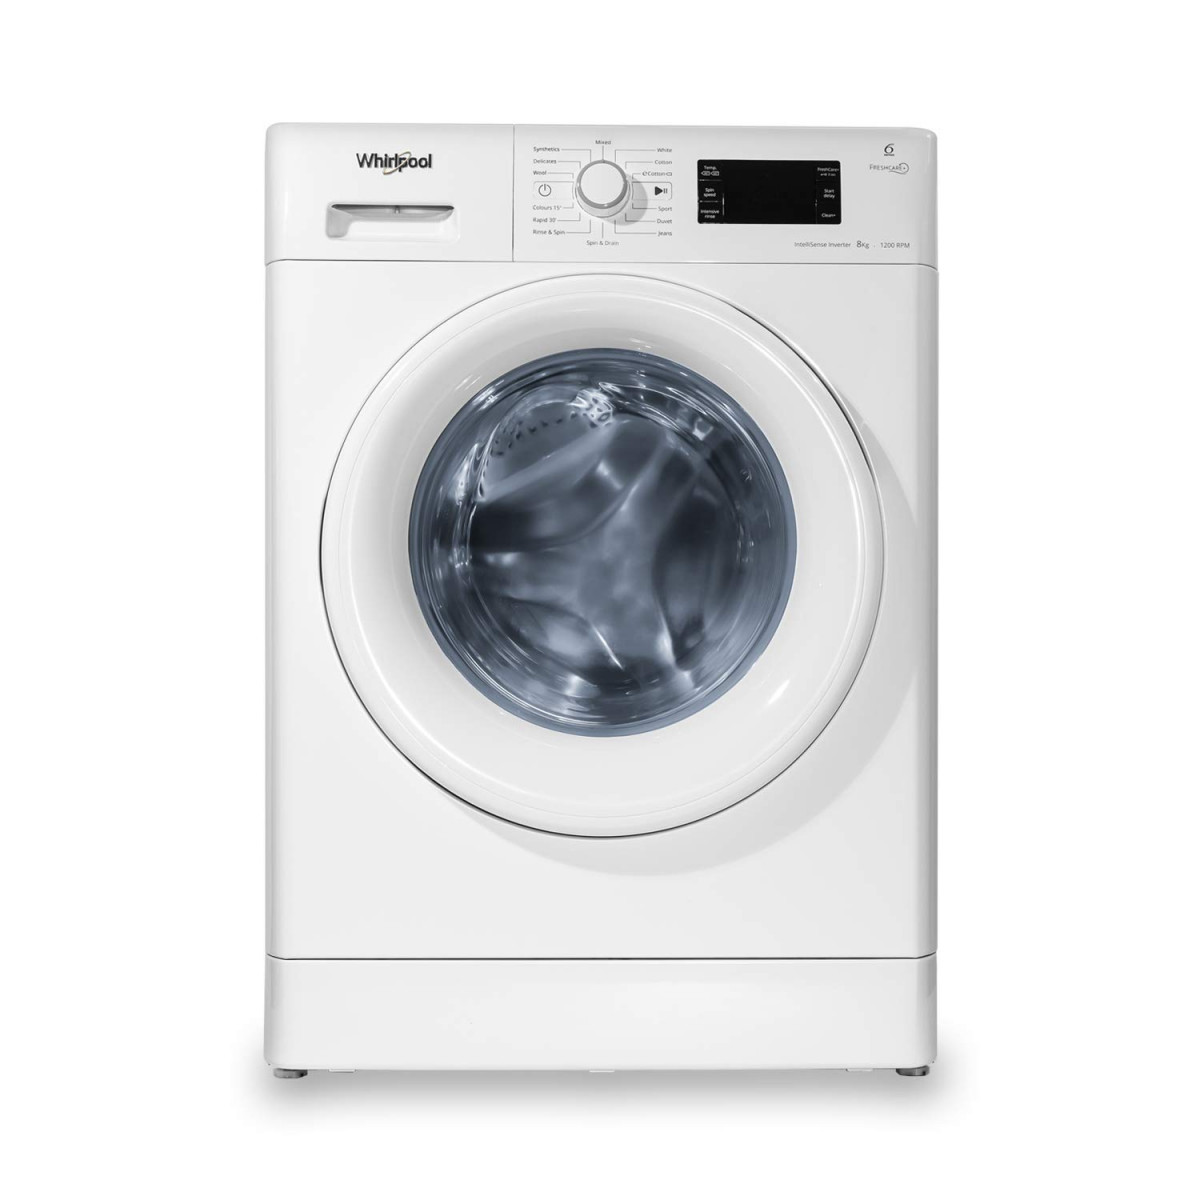 Whirlpool 8 kg Inverter Fully Automatic Front Load Washing Machine Appliance Fresh Care 8212 White Inbuilt Heater